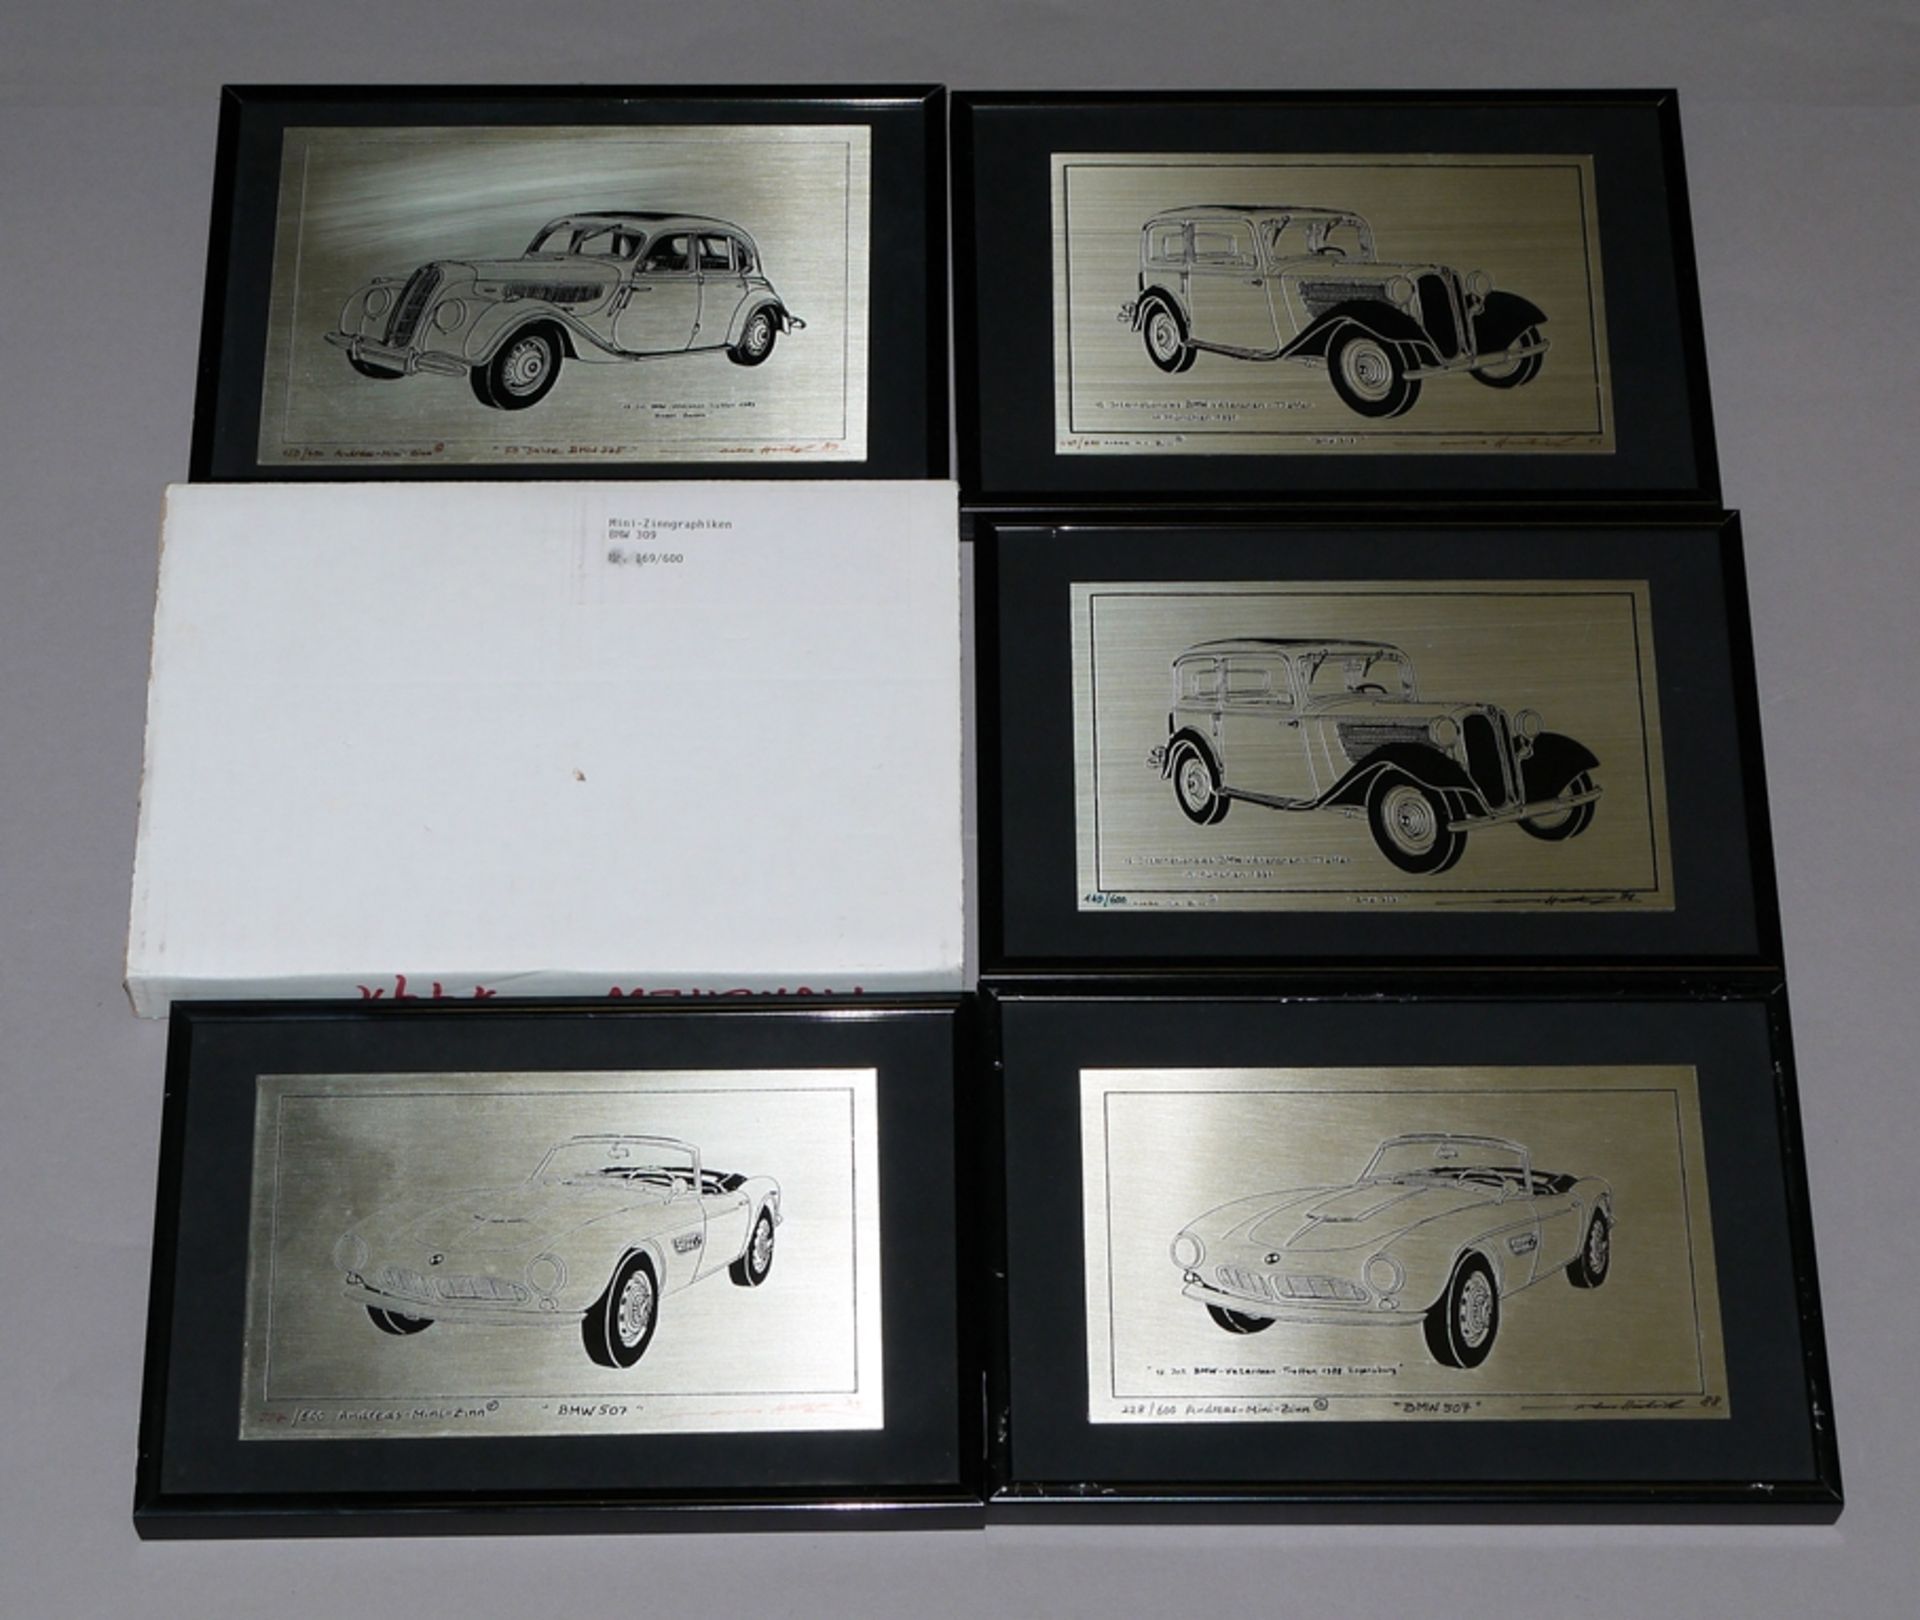 7 x Art for Car and Automobile Fans: Louis Baillon, Paul Bracq, Andreas Hentrich, Simon Loasby, Ern - Image 9 of 13